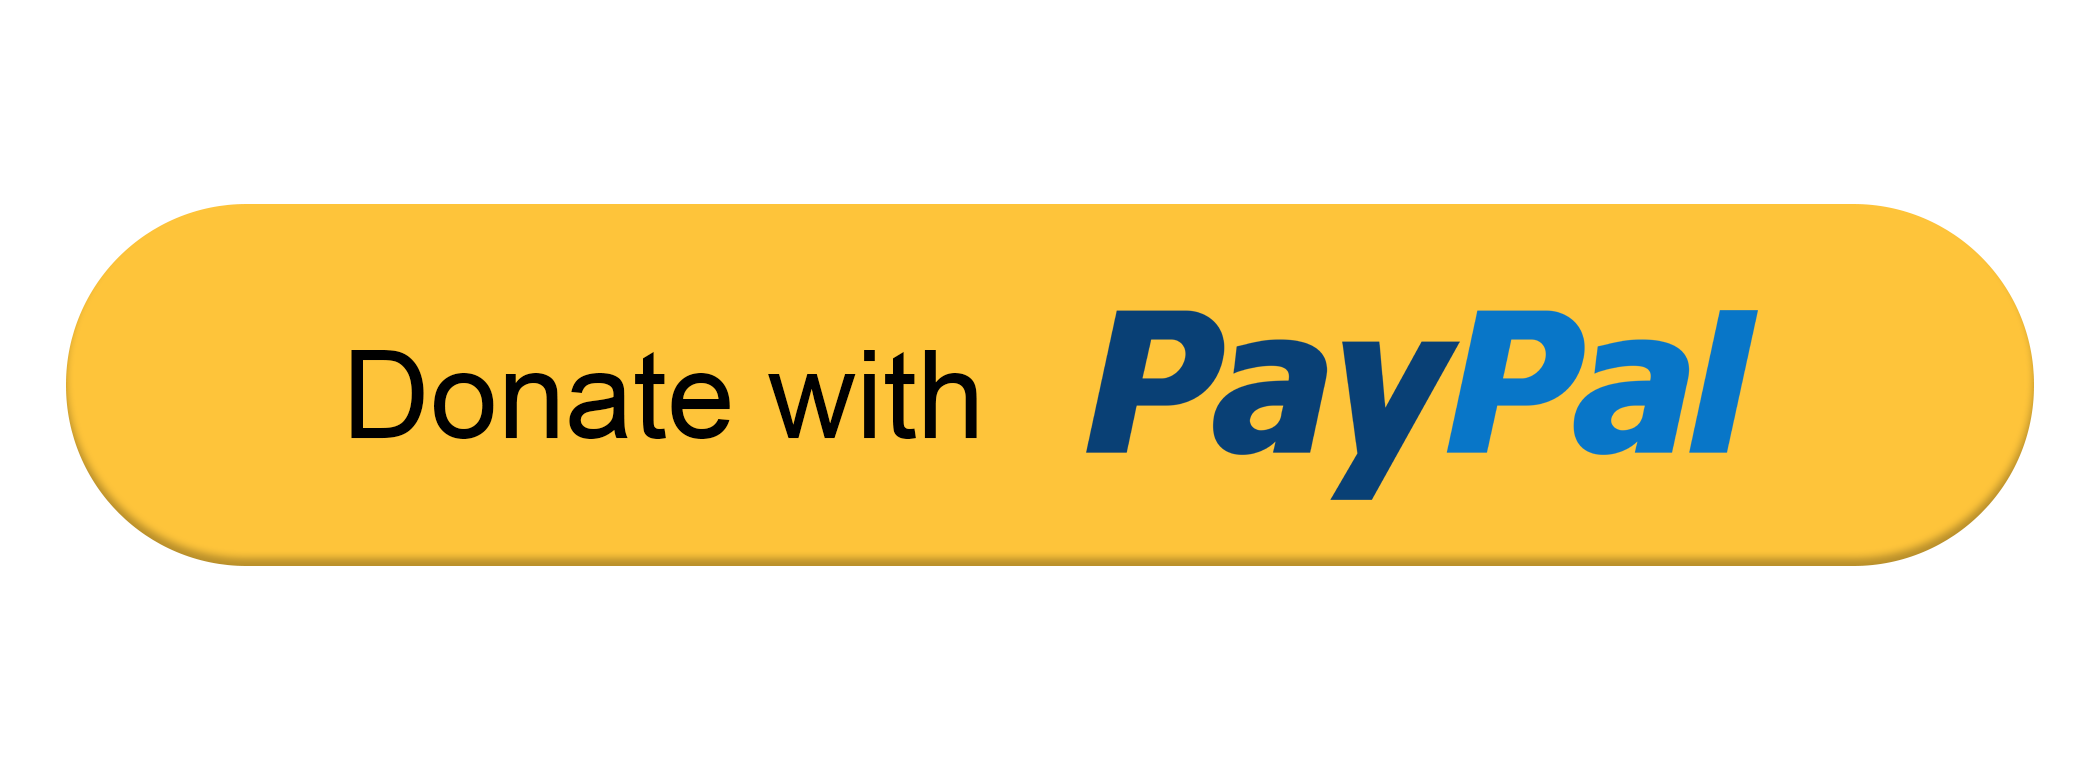 'Donate with Paypal' banner